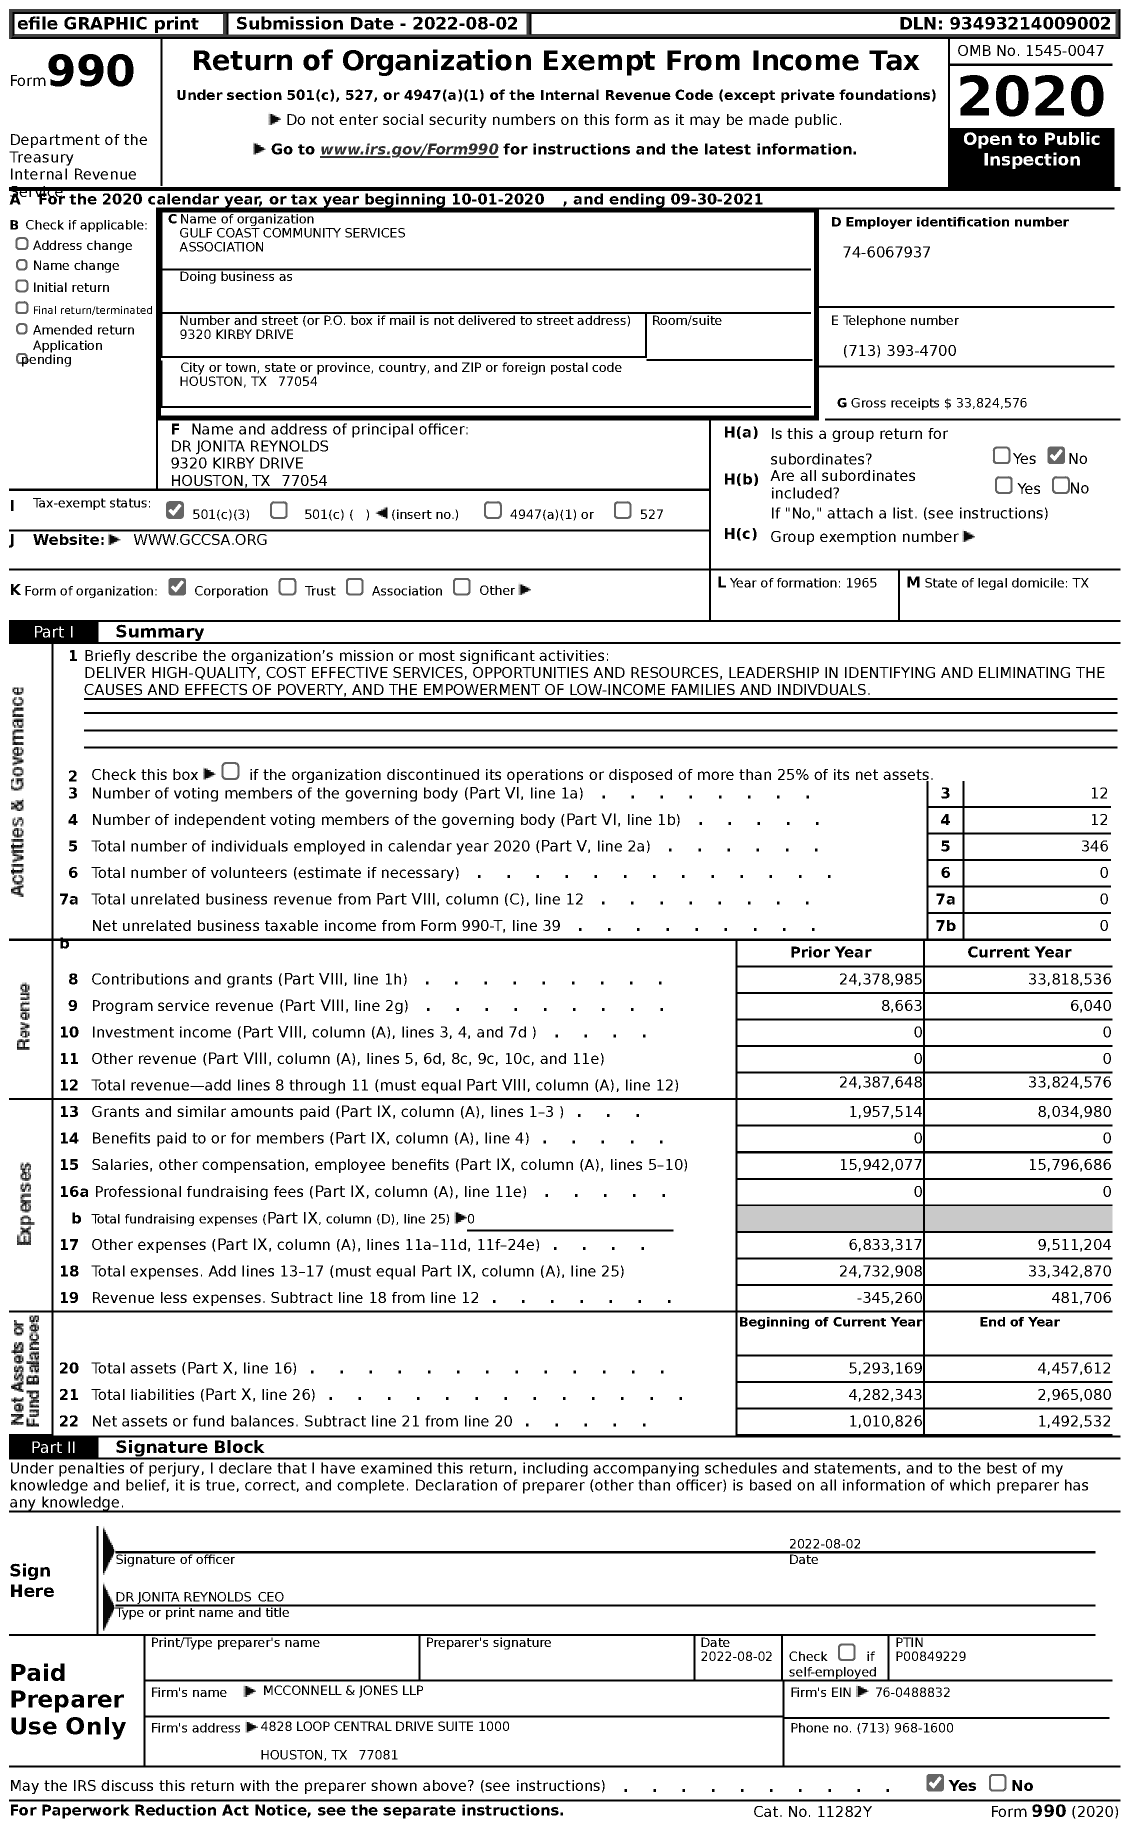 Image of first page of 2020 Form 990 for Gulf Coast Community Services Association (GCCSA)